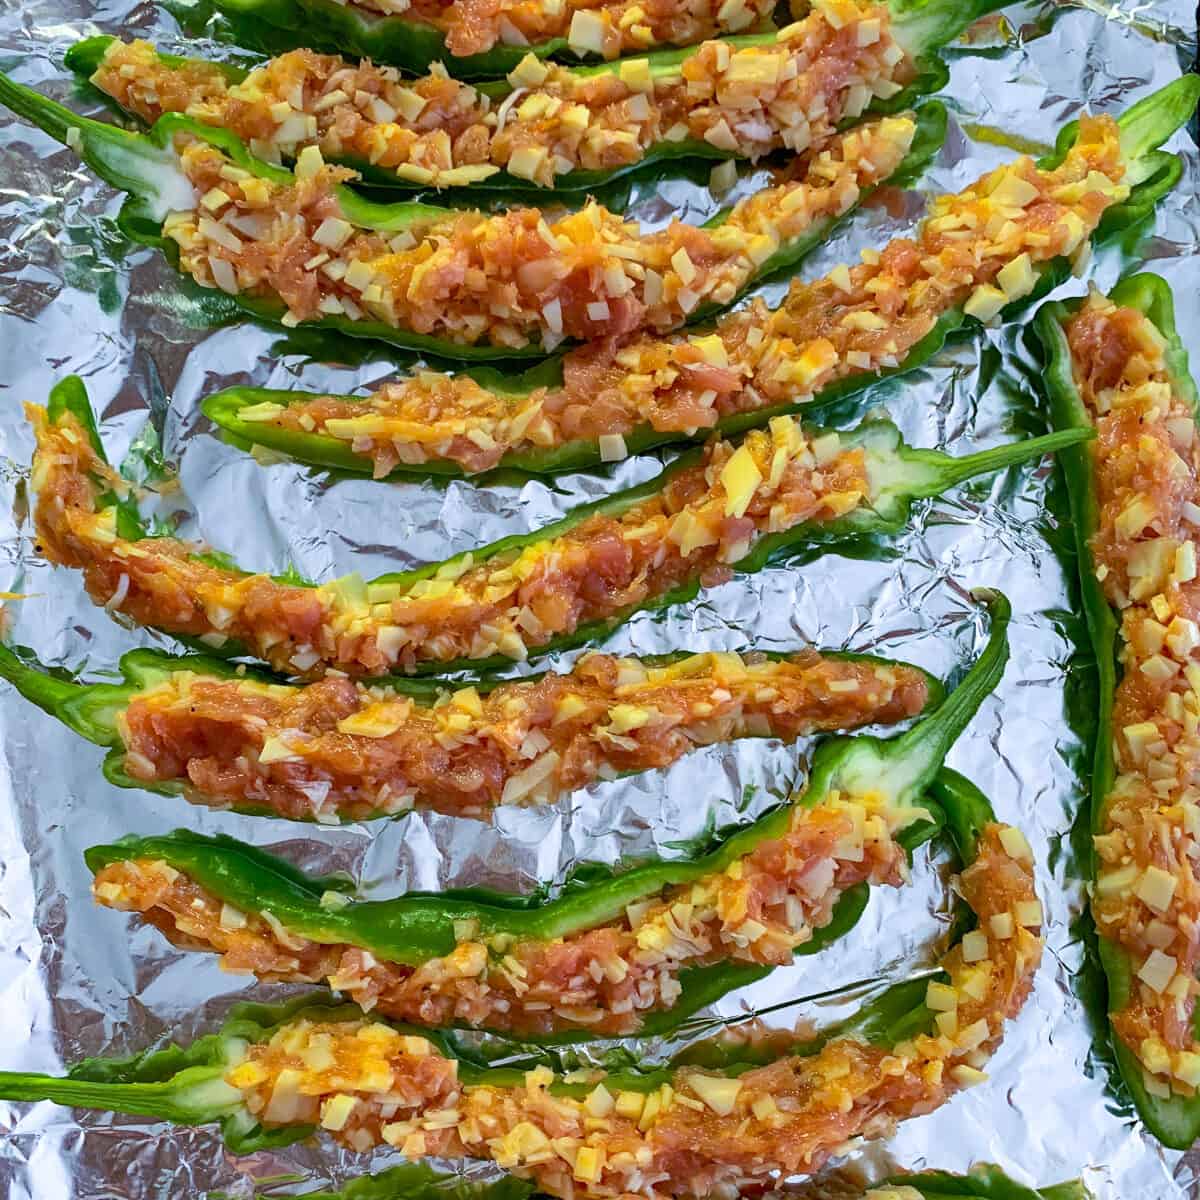 stuffed Italian long hots on aluminum foil ready to be topped with breadcrumbs and baked